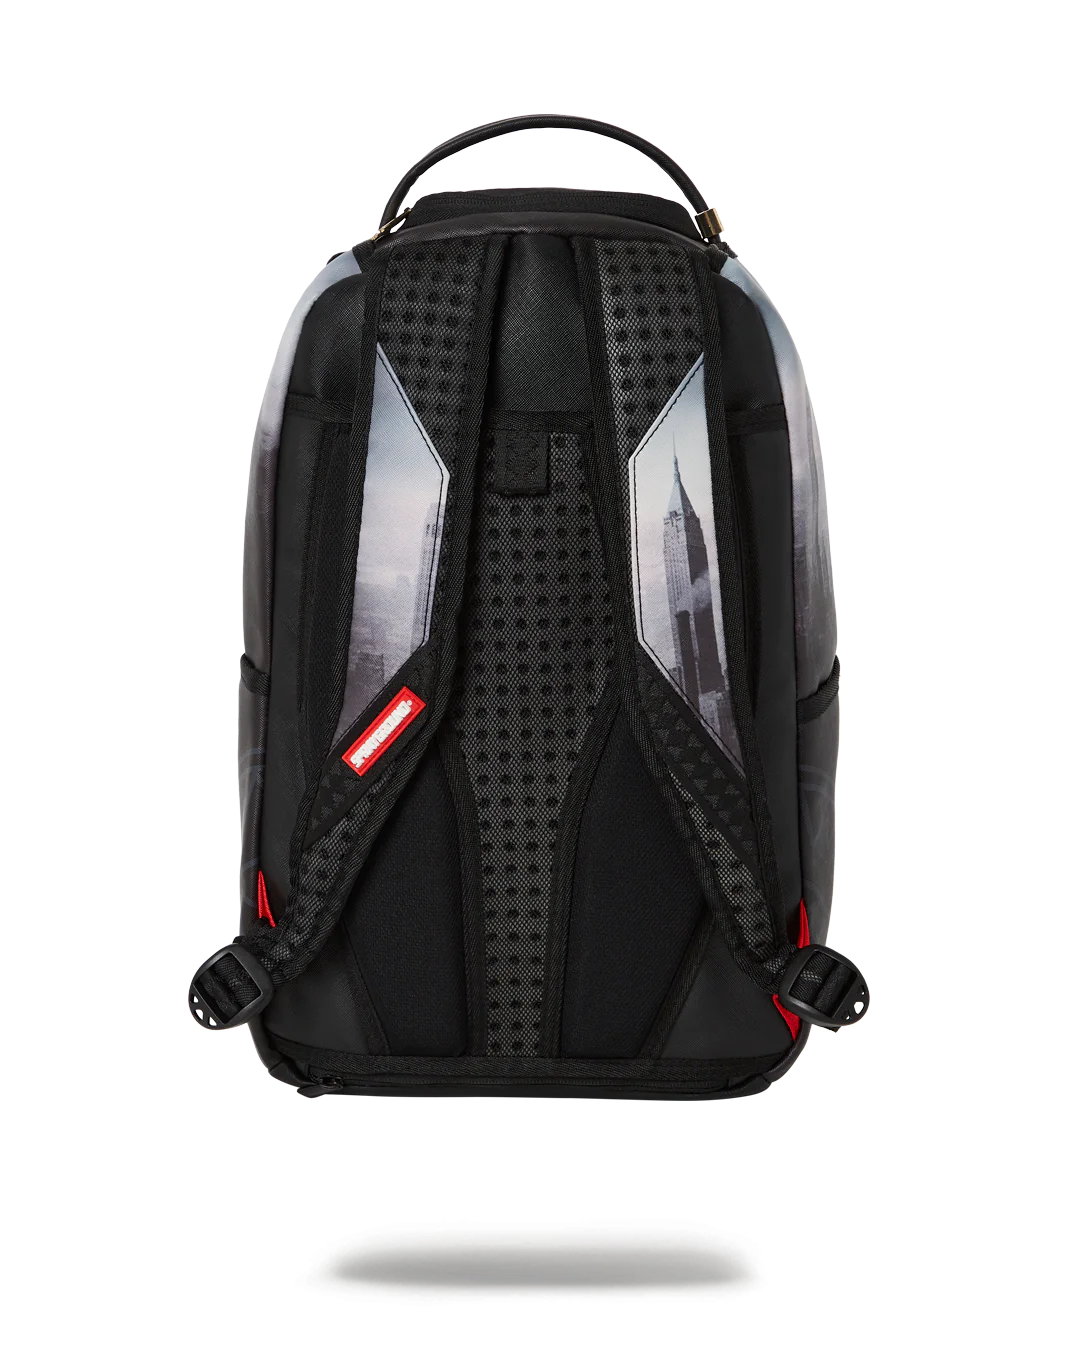 THE GODFATHER BACKPACK (DLXV)